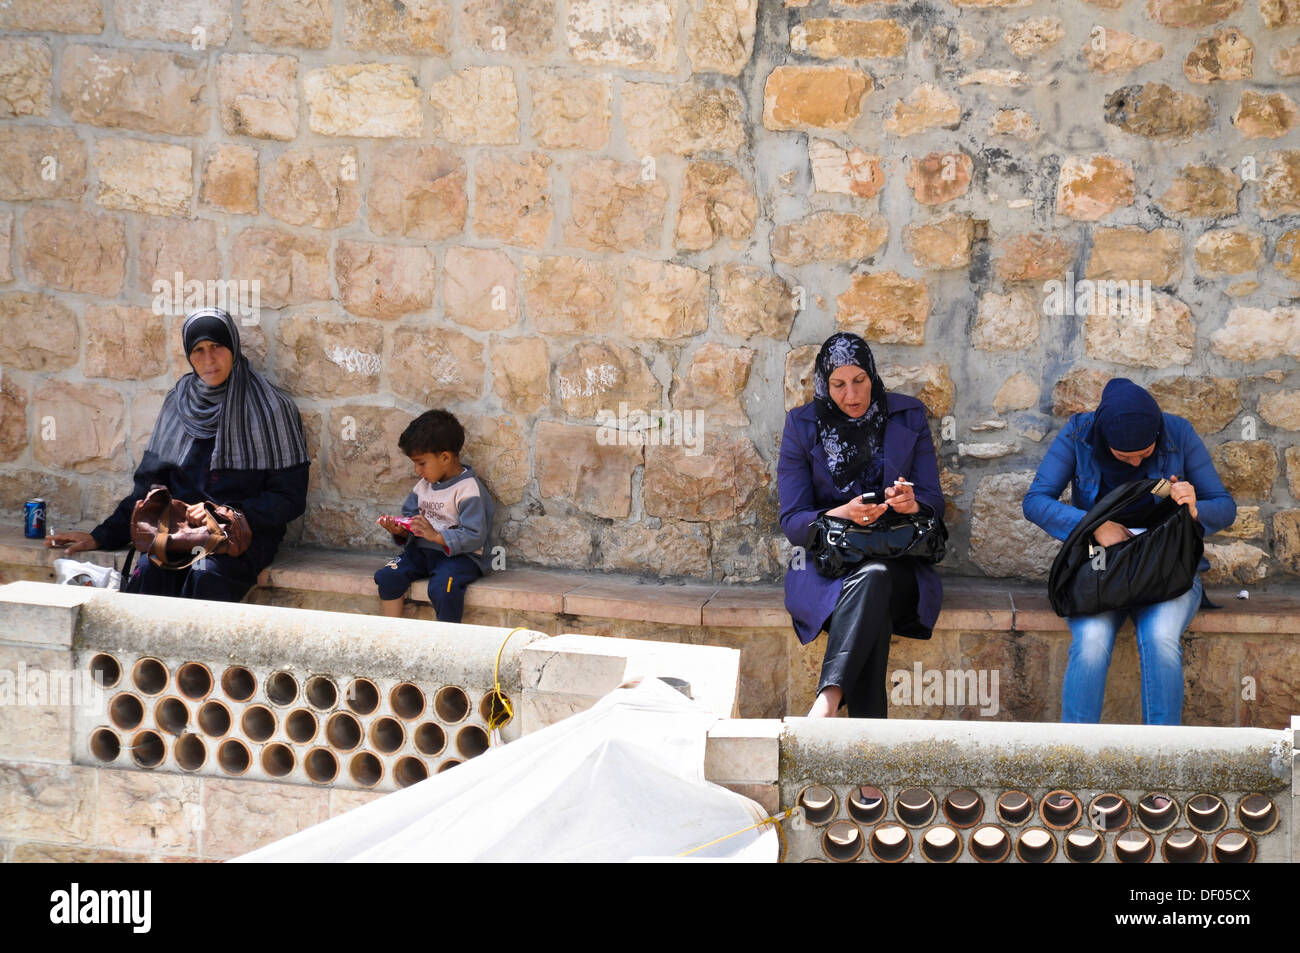 Veiled women smoking cigarettes and cell phones and a boy sitting on the city wall, Jerusalem, Israel, Middle East Stock Photo